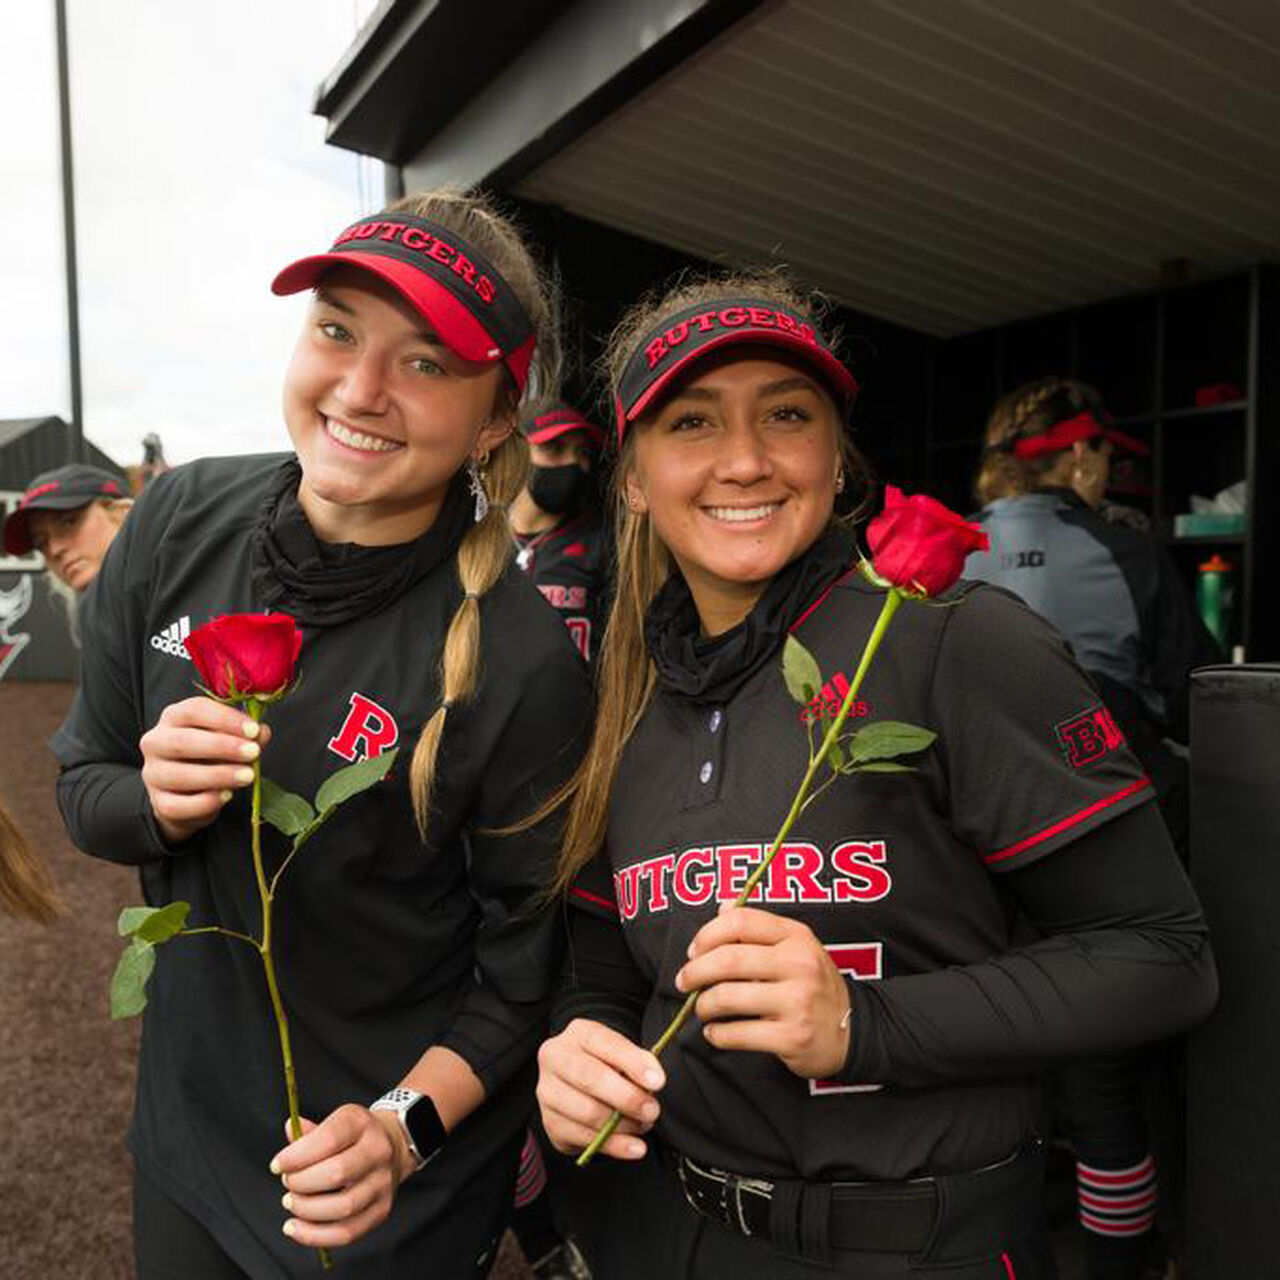 Two Rutgers Softball players smiling and holding roses in front of the dugout image number 0